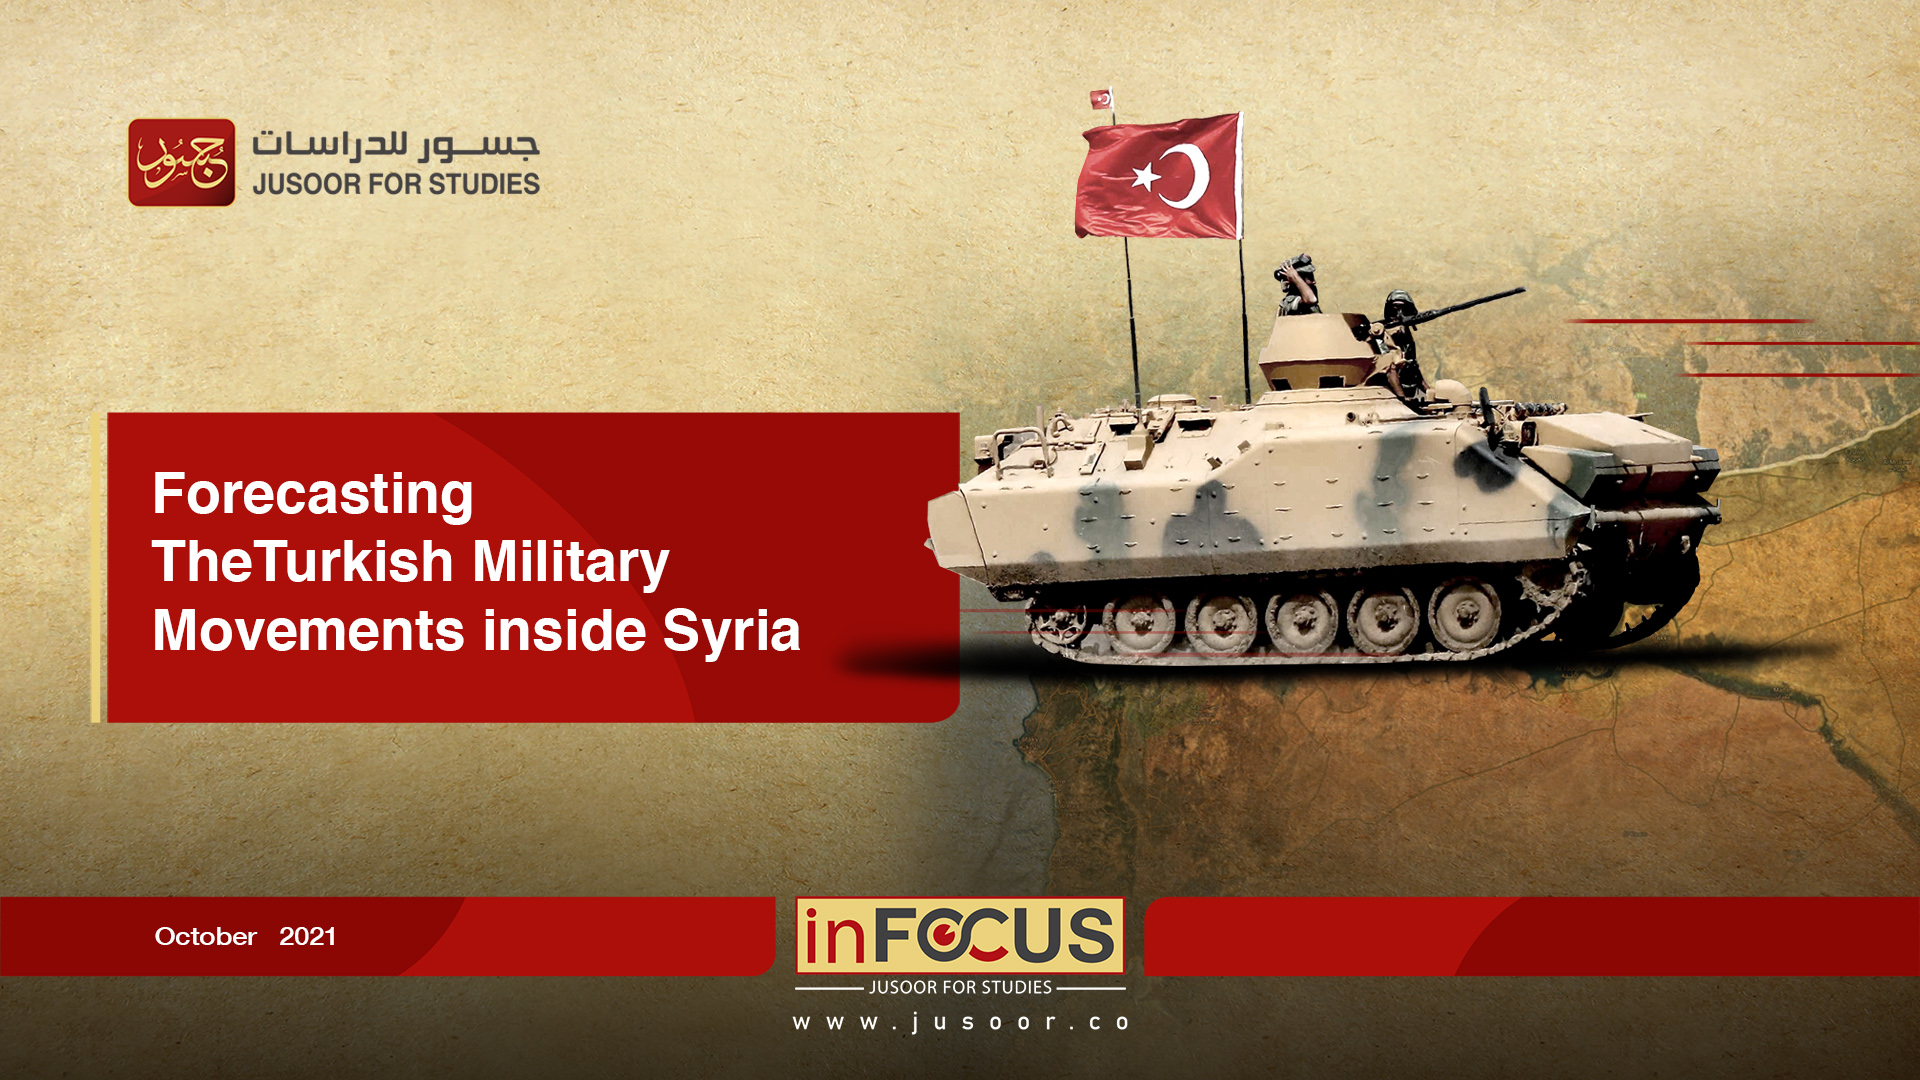 Forecasting the Turkish Military Movements inside Syria